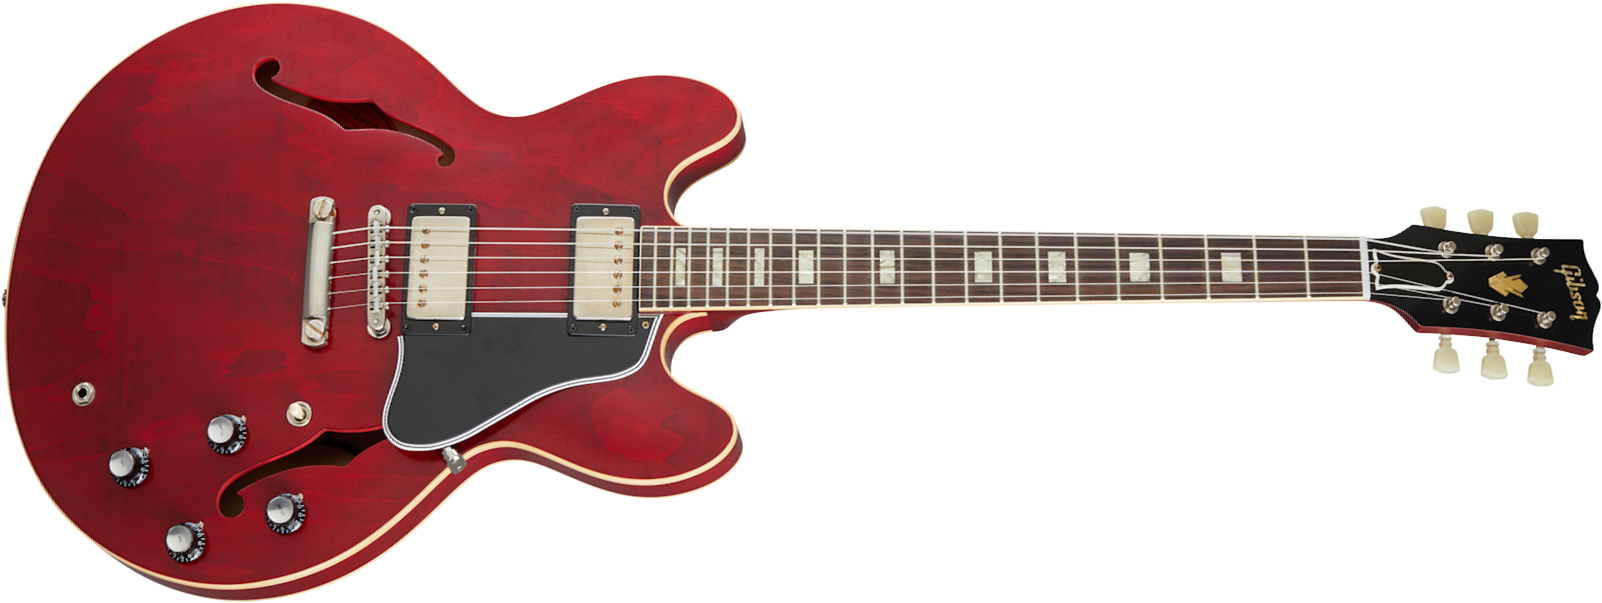 Gibson Custom Shop Historic Es-335 Reissue 1964 2h Ht Rw - Vos Sixties Cherry - Semi-hollow electric guitar - Main picture